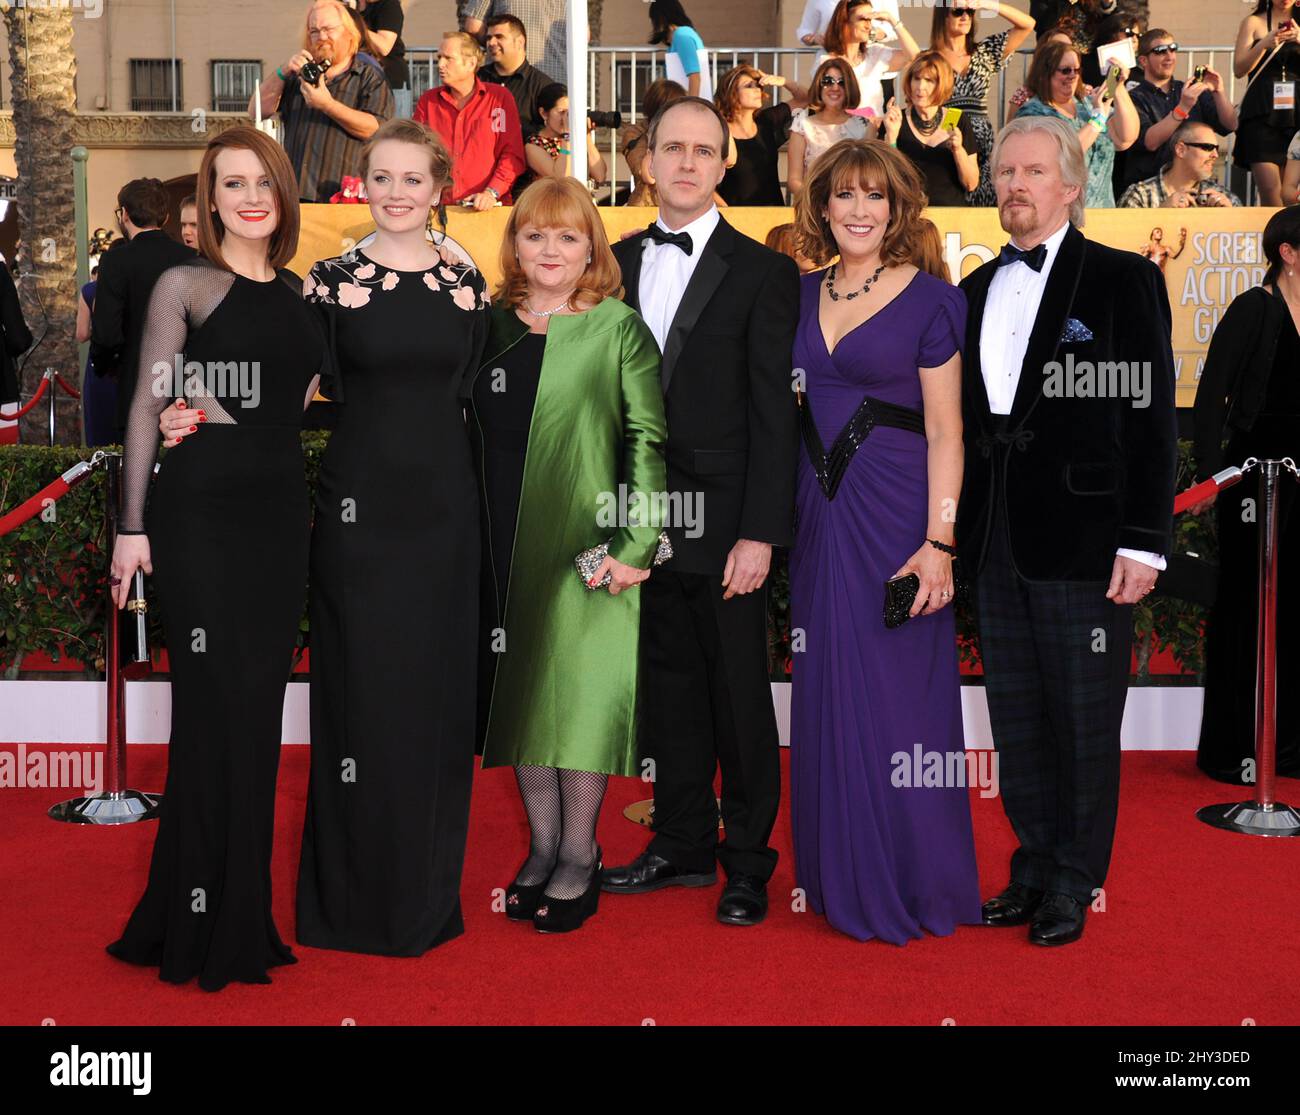 Sophie McShera, Cara Theobold, Lesley Nicol, Kevin Doyle, Phyllis Logan and David Robb attends 20th Annual Screen Actors Guild Awards held at the Shrine Auditorium Stock Photo